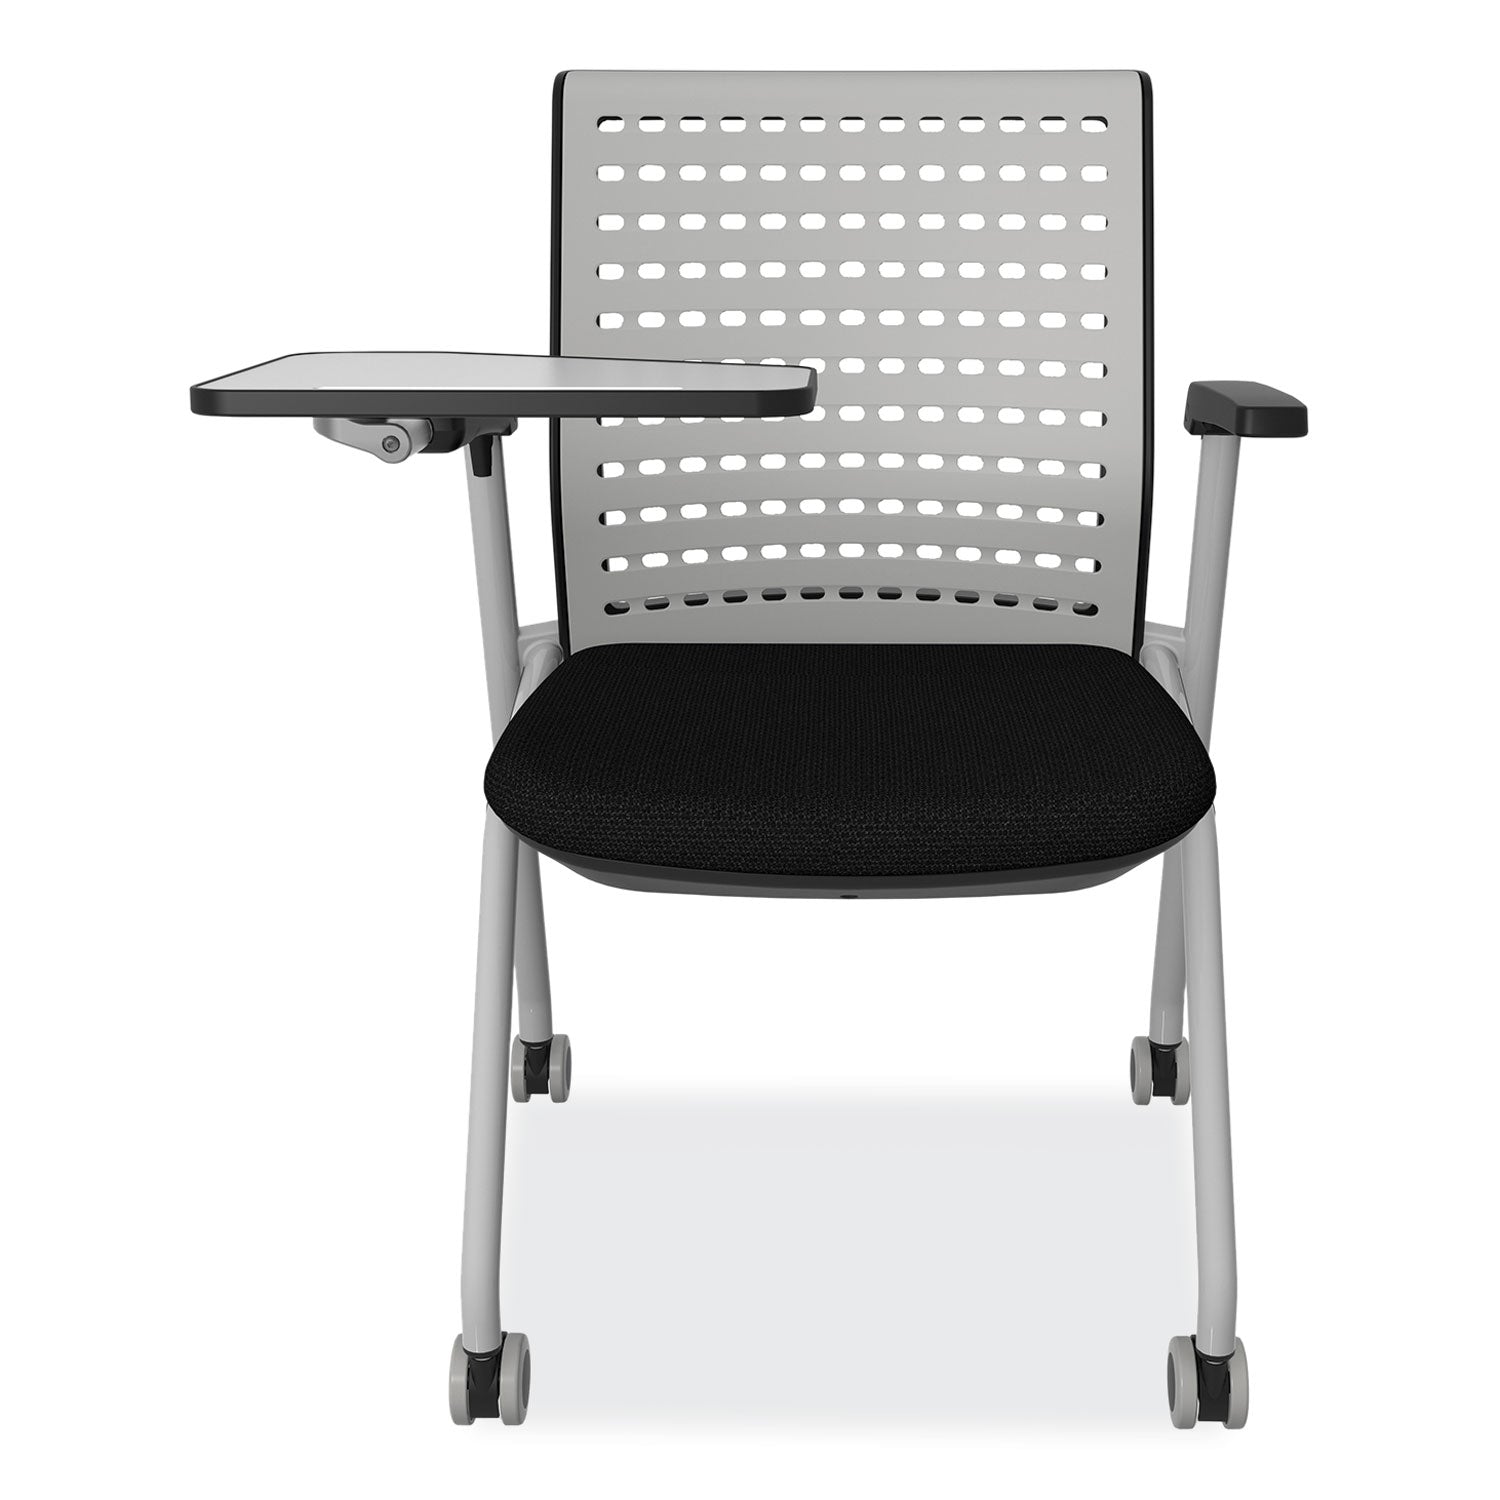 thesis-training-chair-w-static-back-and-tablet-supports-250lb-18-high-black-seatgray-back-baseships-in-1-3-business-days_safkts3sgblk - 2